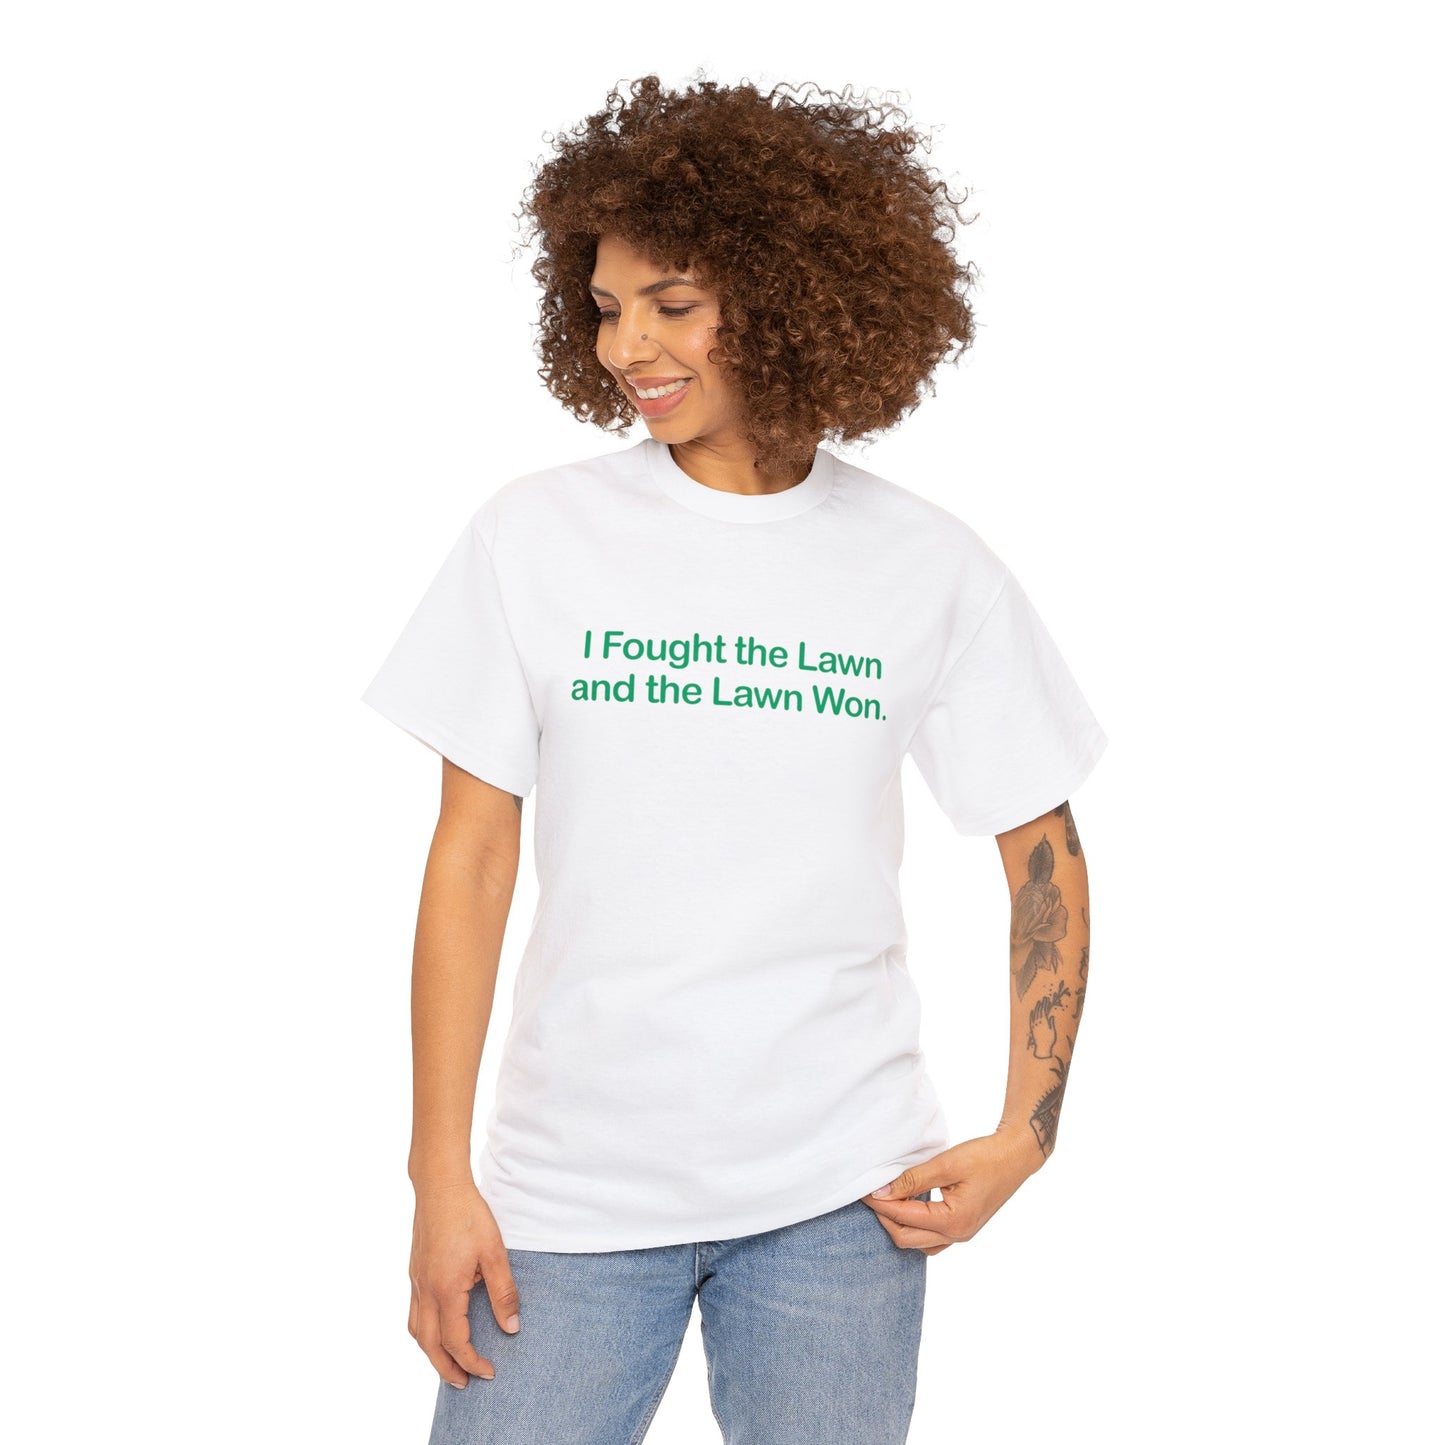 I Fought the Lawn and the Lawn Won, Funny T-Shirt, Lawnmowing t-shirt, Fun Dad Gift, Funny Dad T-shirt, Dad Lawn Humor, Father's Day Gift